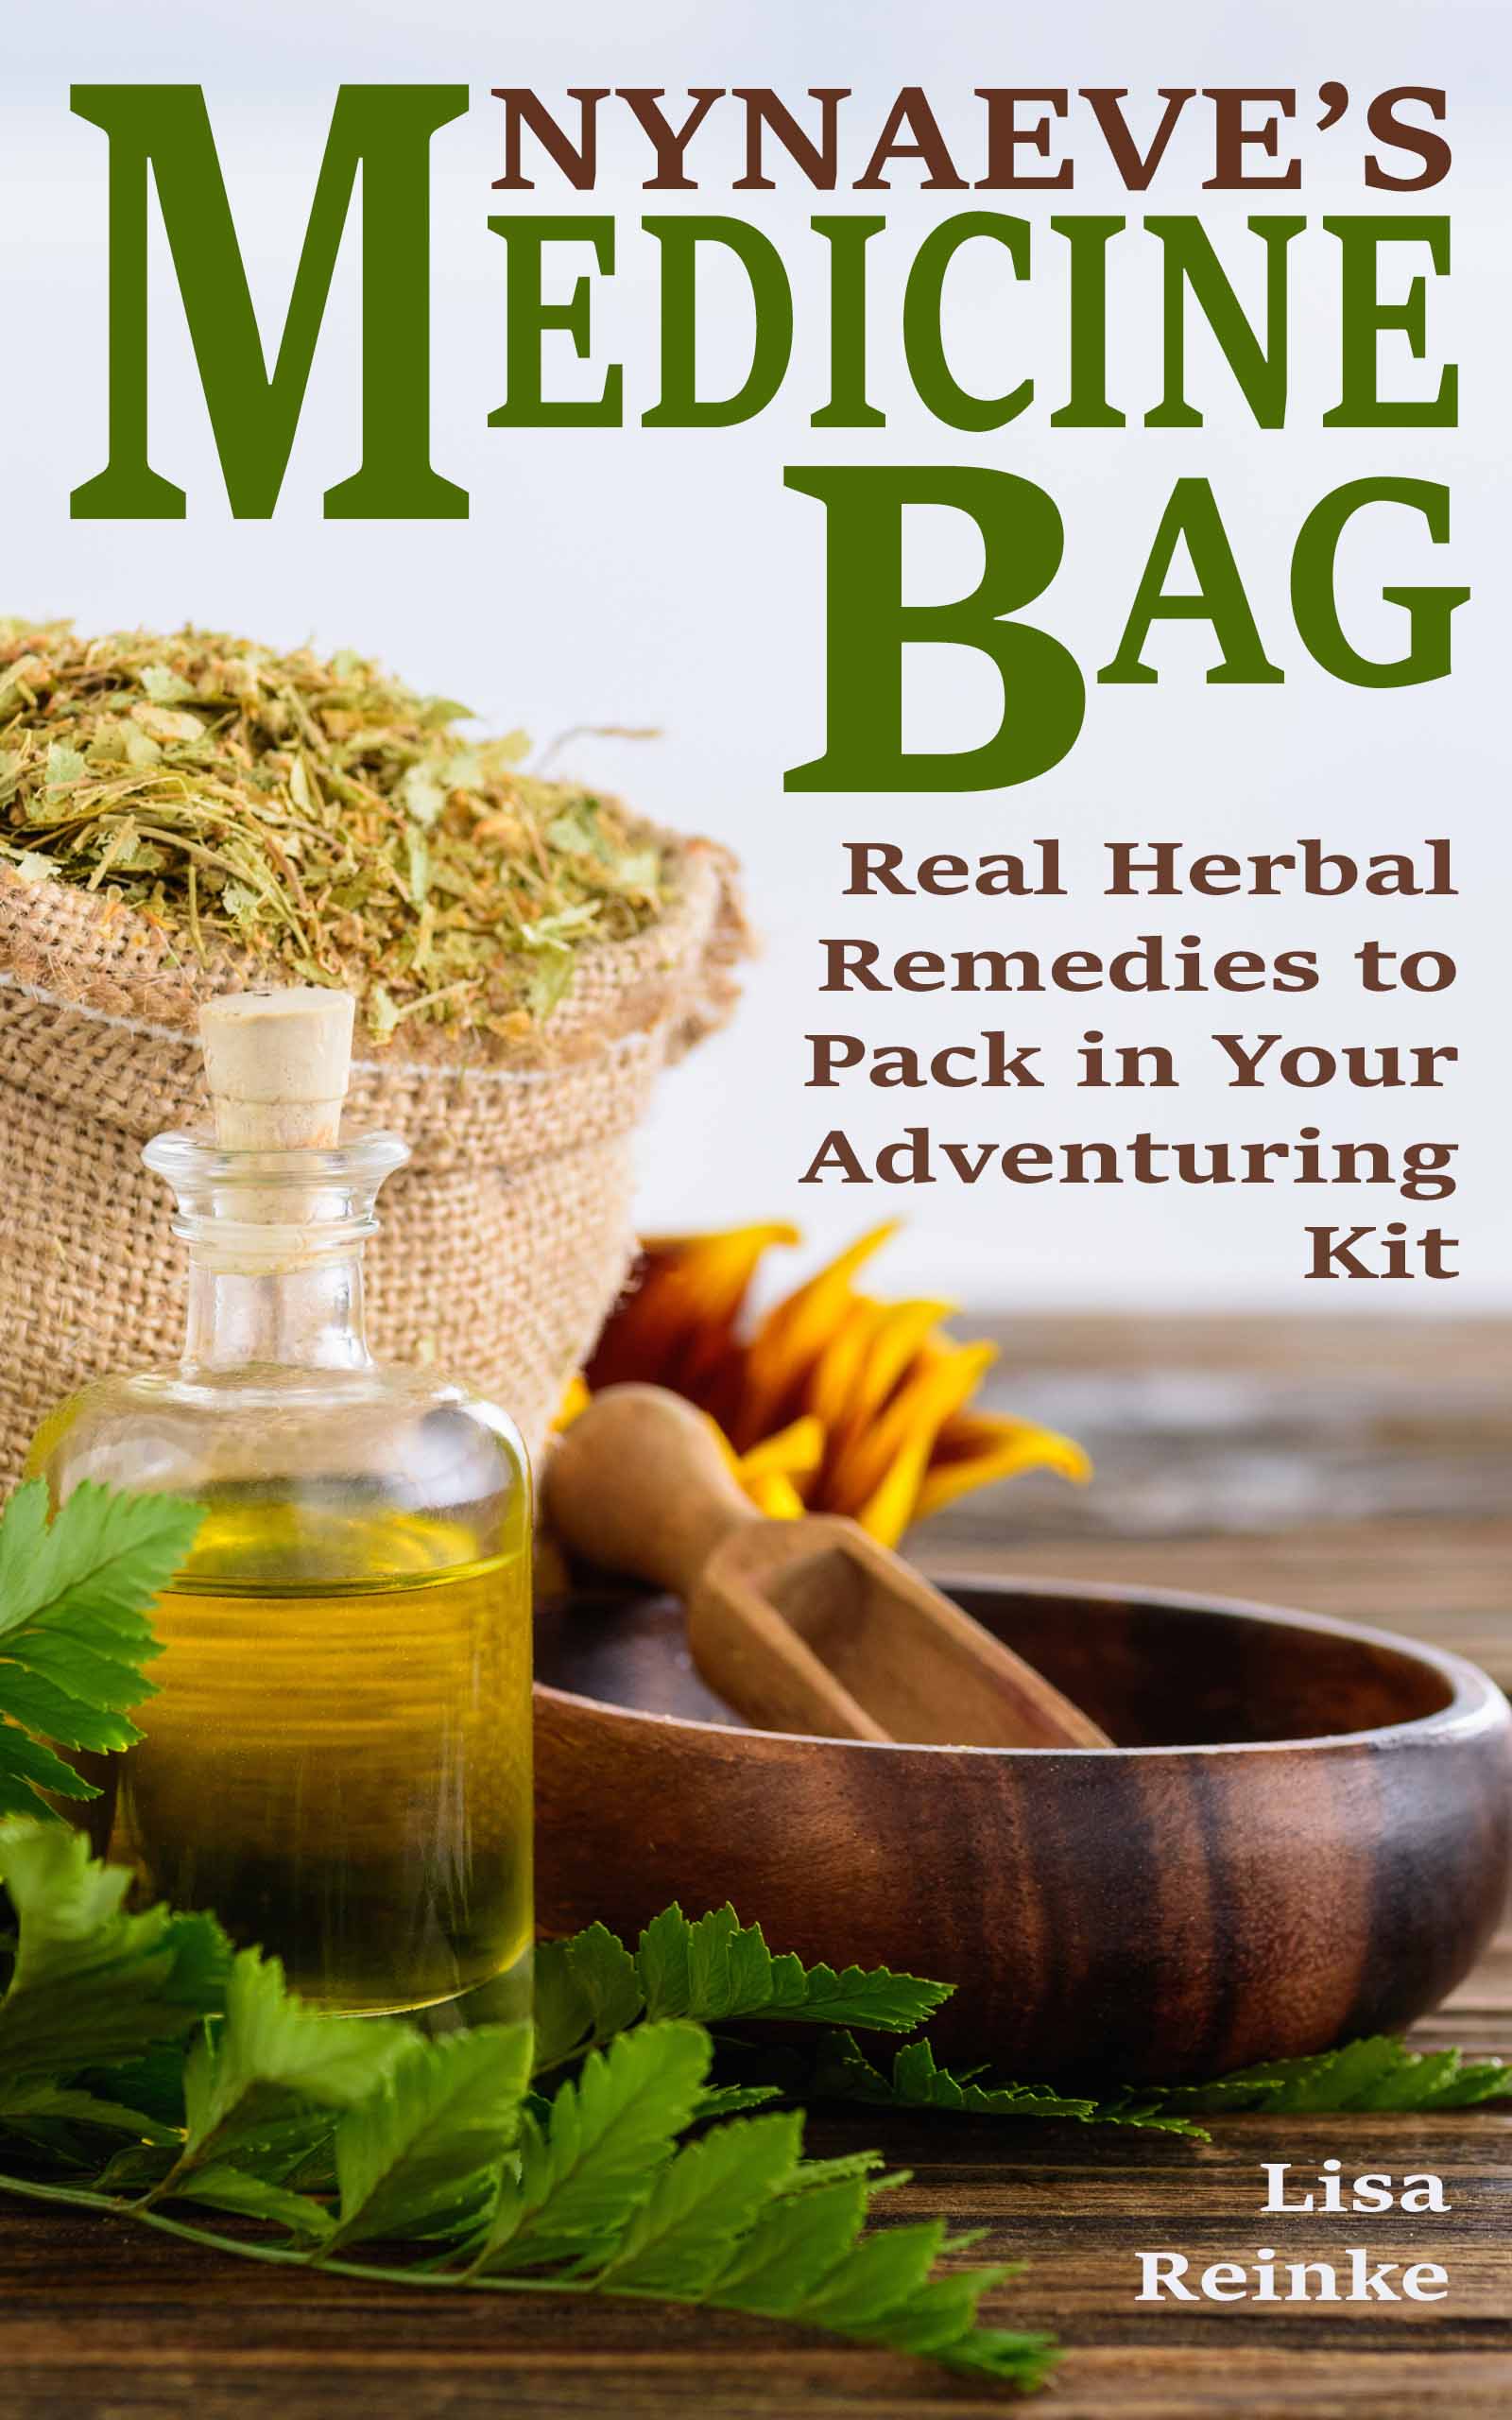 FREE: Nynaeve’s Medicine Bag: Real Herbal Remedies to Pack in Your Adventuring Kit by Lisa Reinke